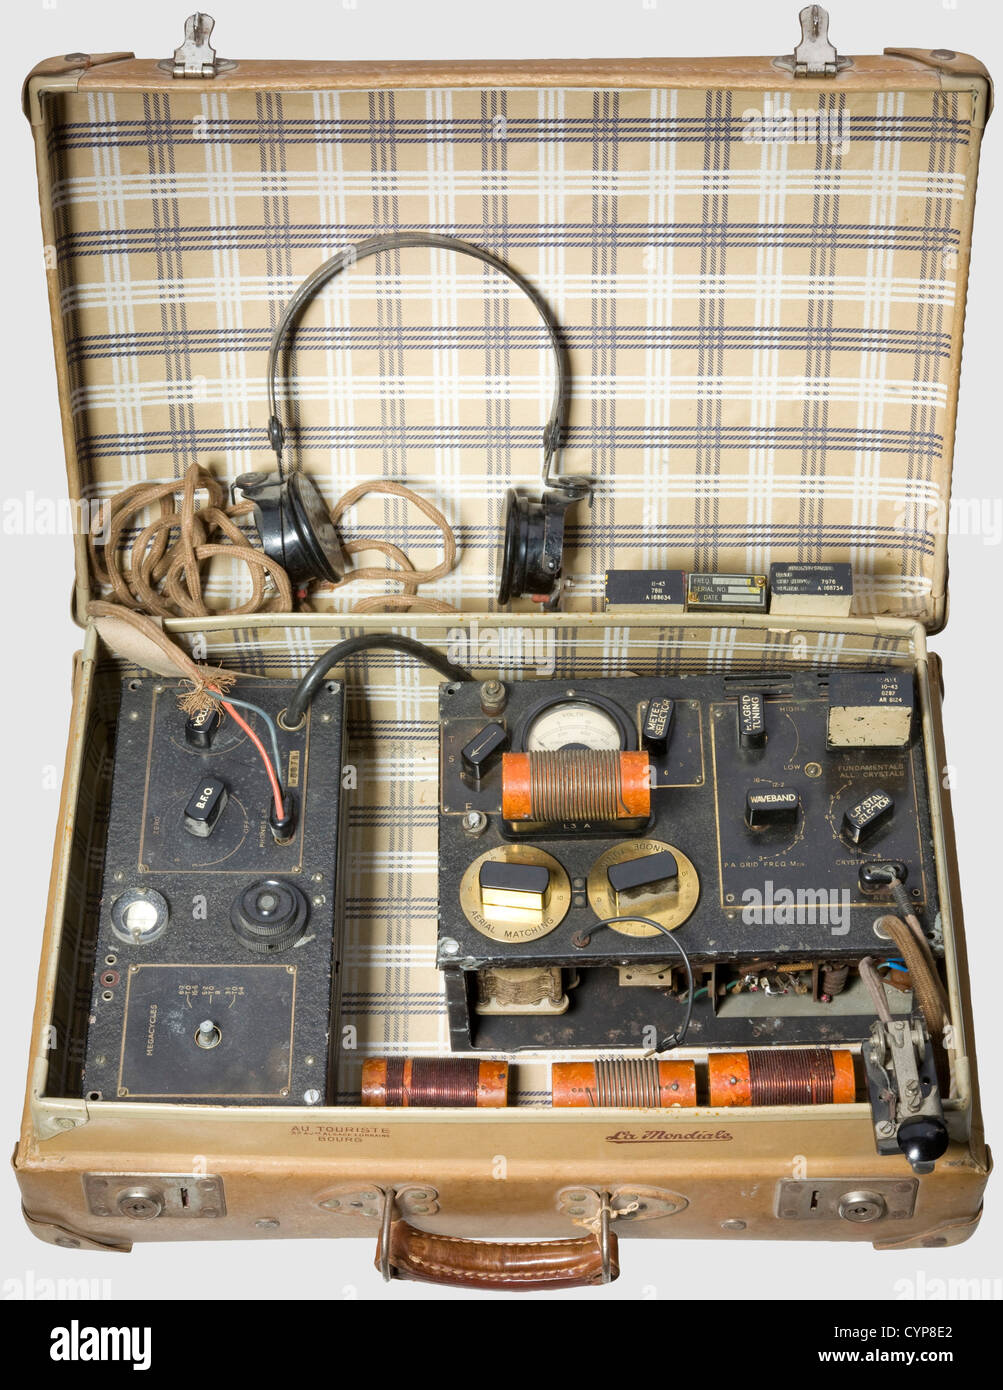 A radio 3 MKII("B2")of the British Special Operation Executive(SOE),from  the Second World War. Consisting of two components: the sender(1944)and  receiver(Model 3/II,missing one knob). The miniature Morse key was probably  on the cover